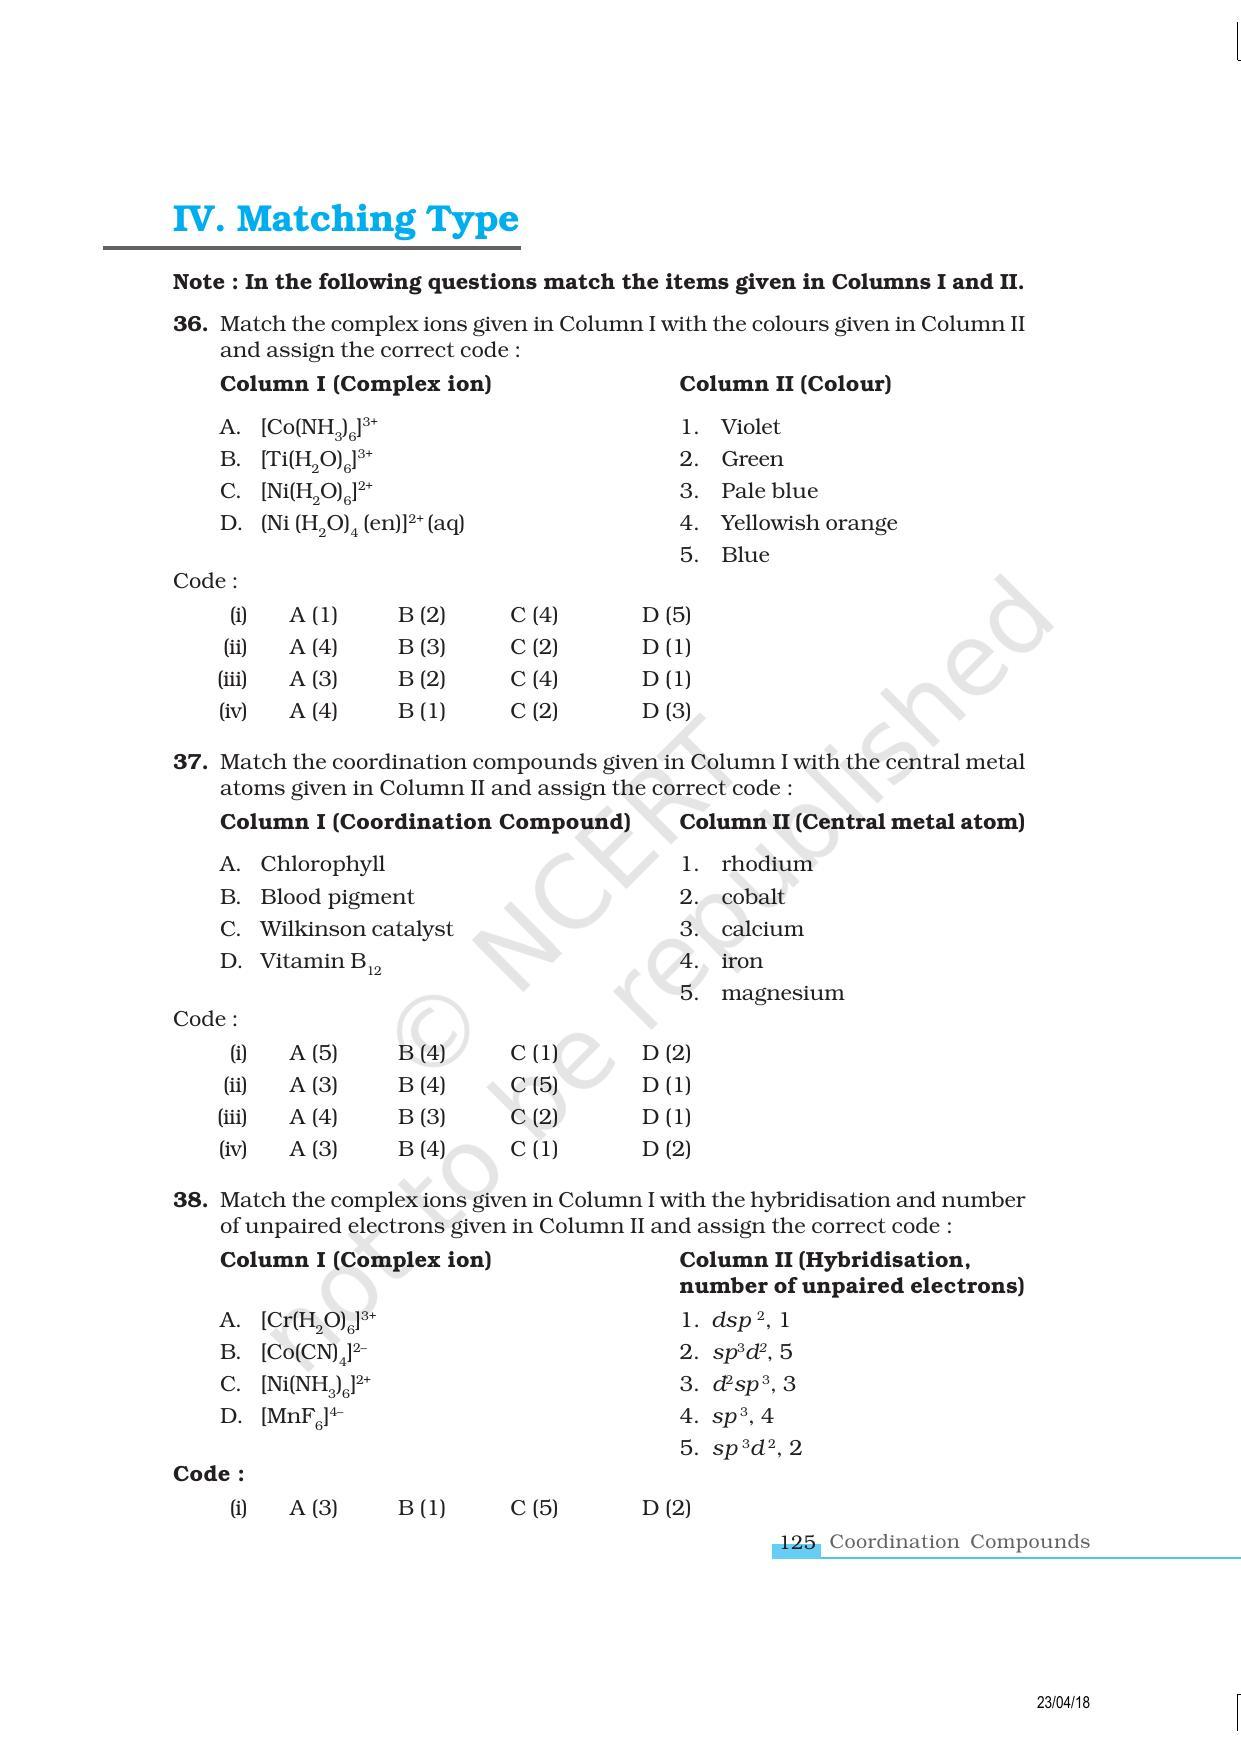 NCERT Exemplar Book for Class 12 Chemistry: Chapter 9 Coordination Compounds - Page 6